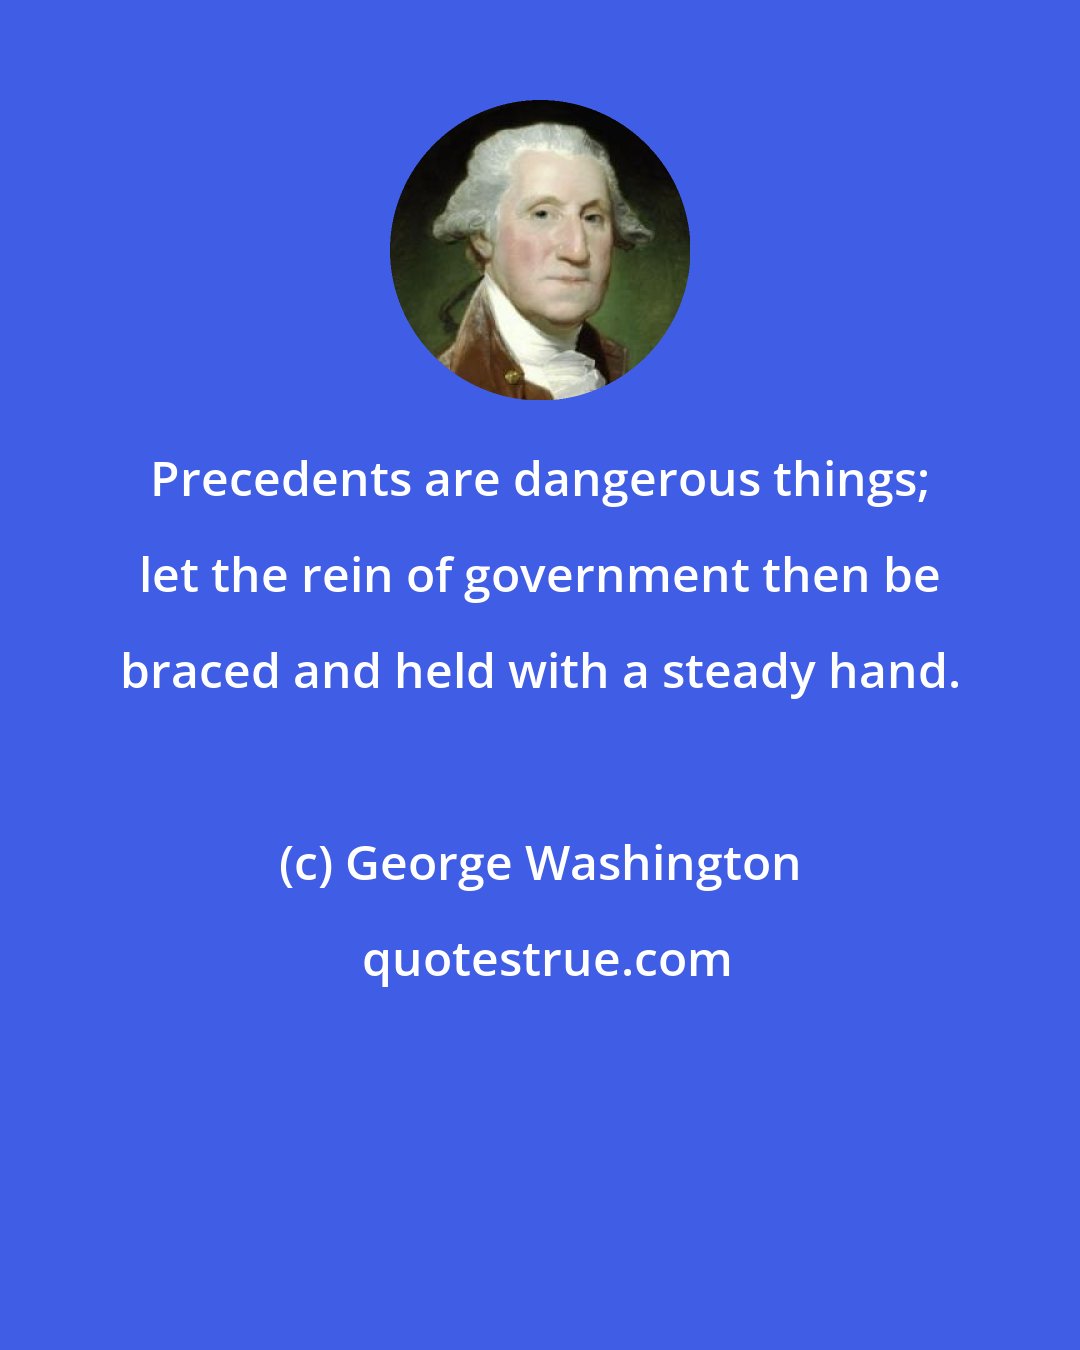 George Washington: Precedents are dangerous things; let the rein of government then be braced and held with a steady hand.